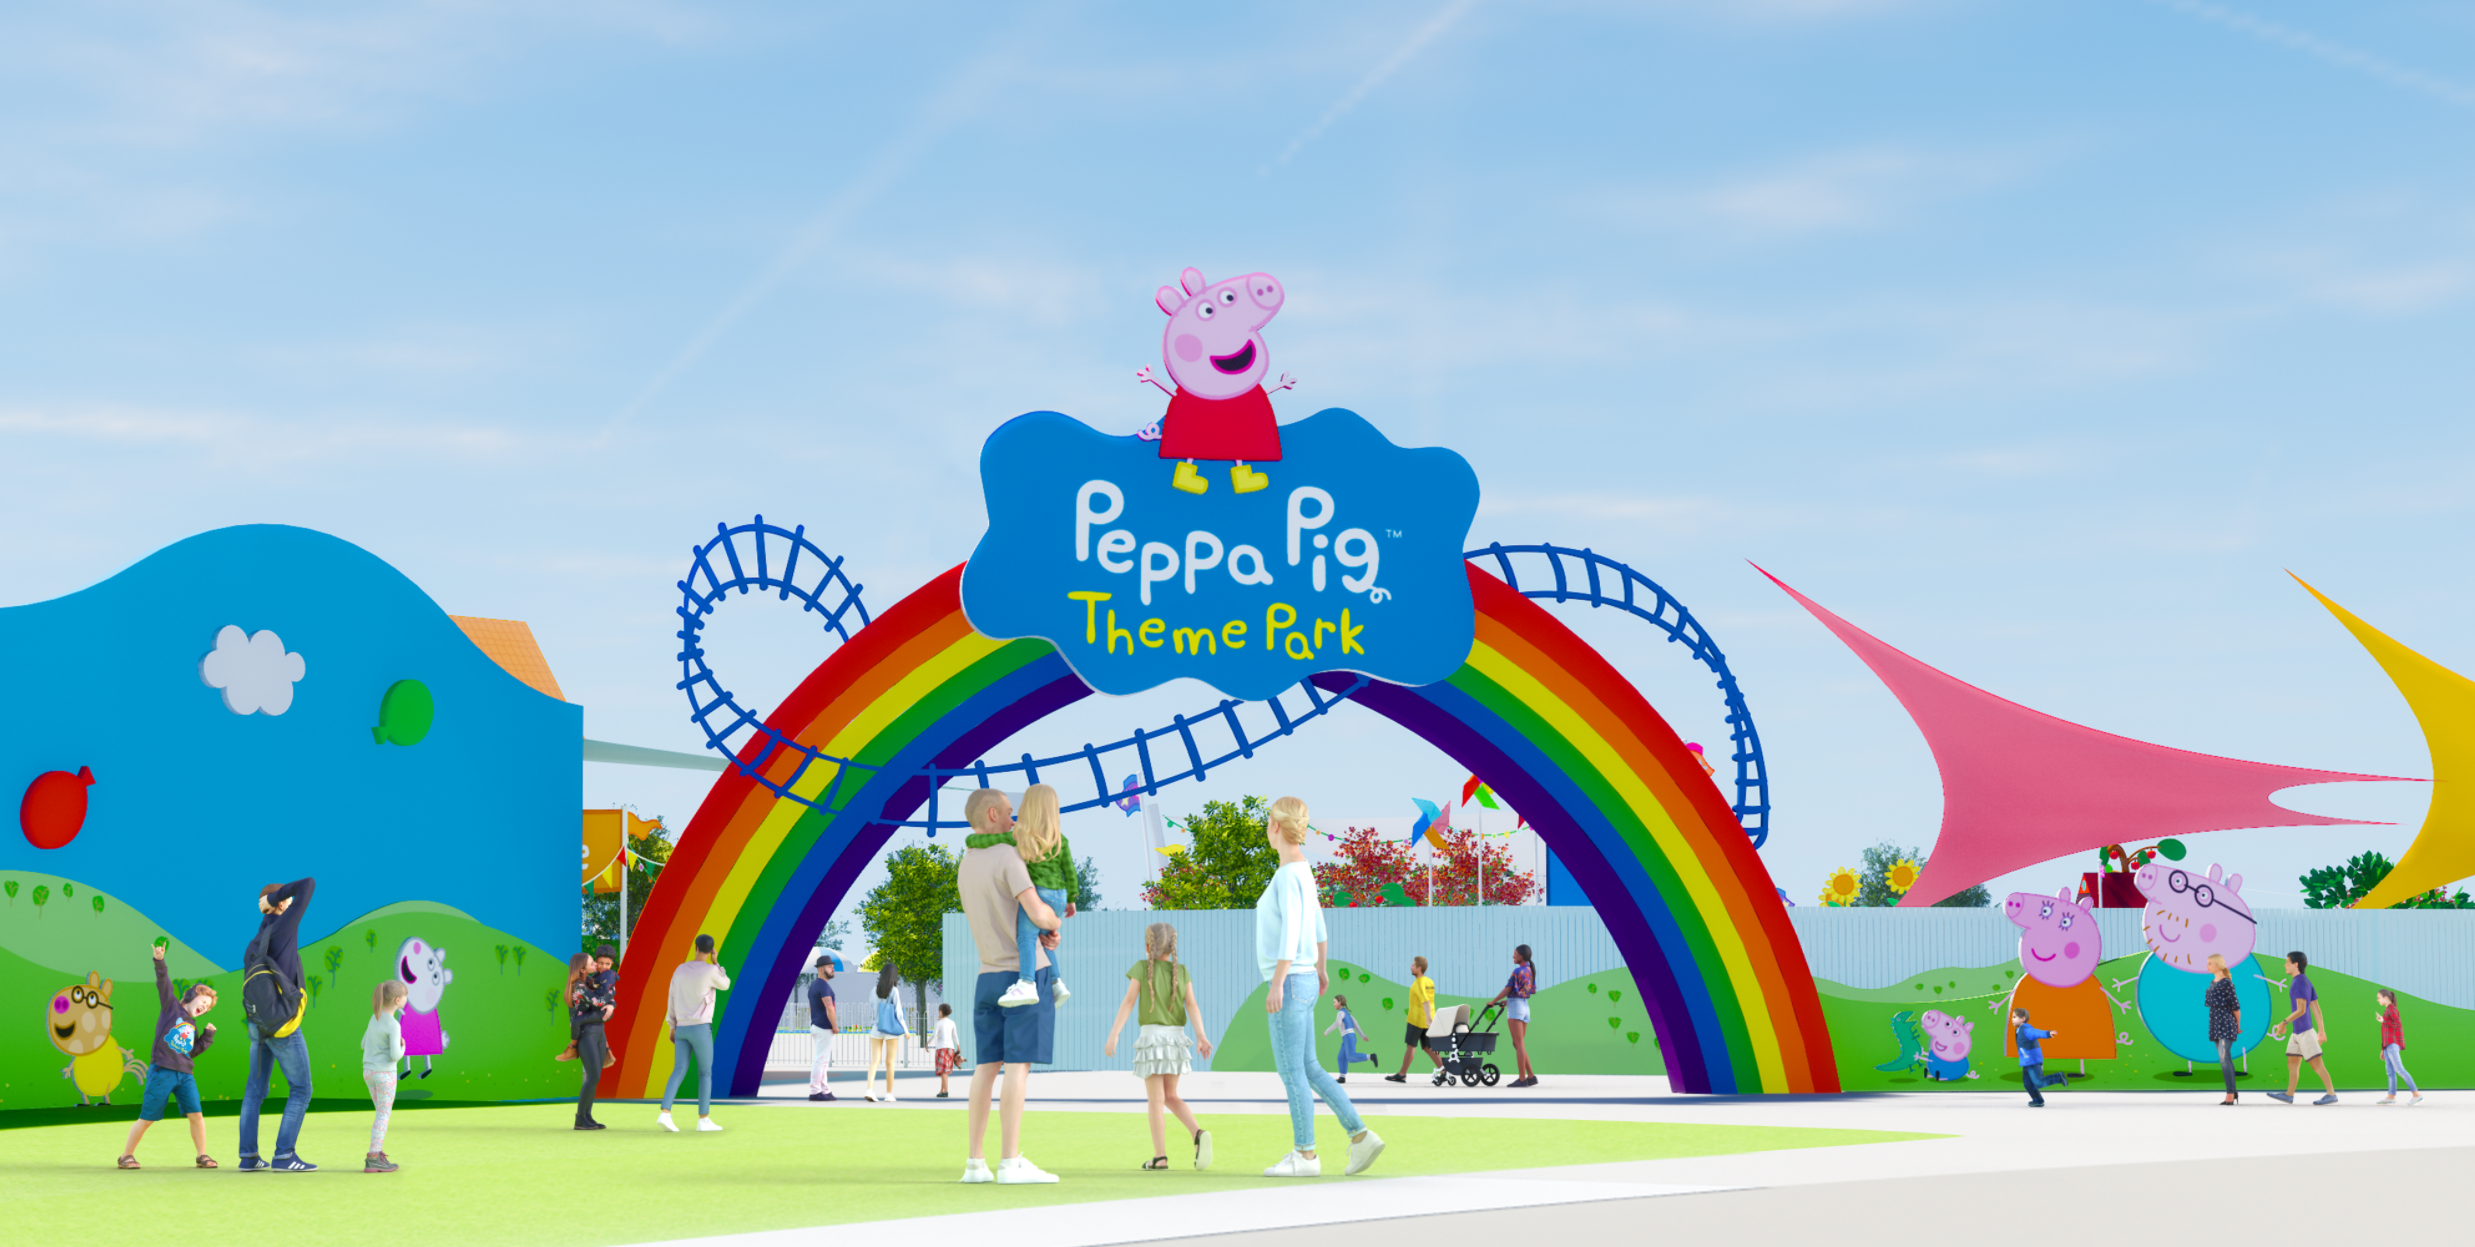 World's first Peppa Pig theme park is coming to Florida!